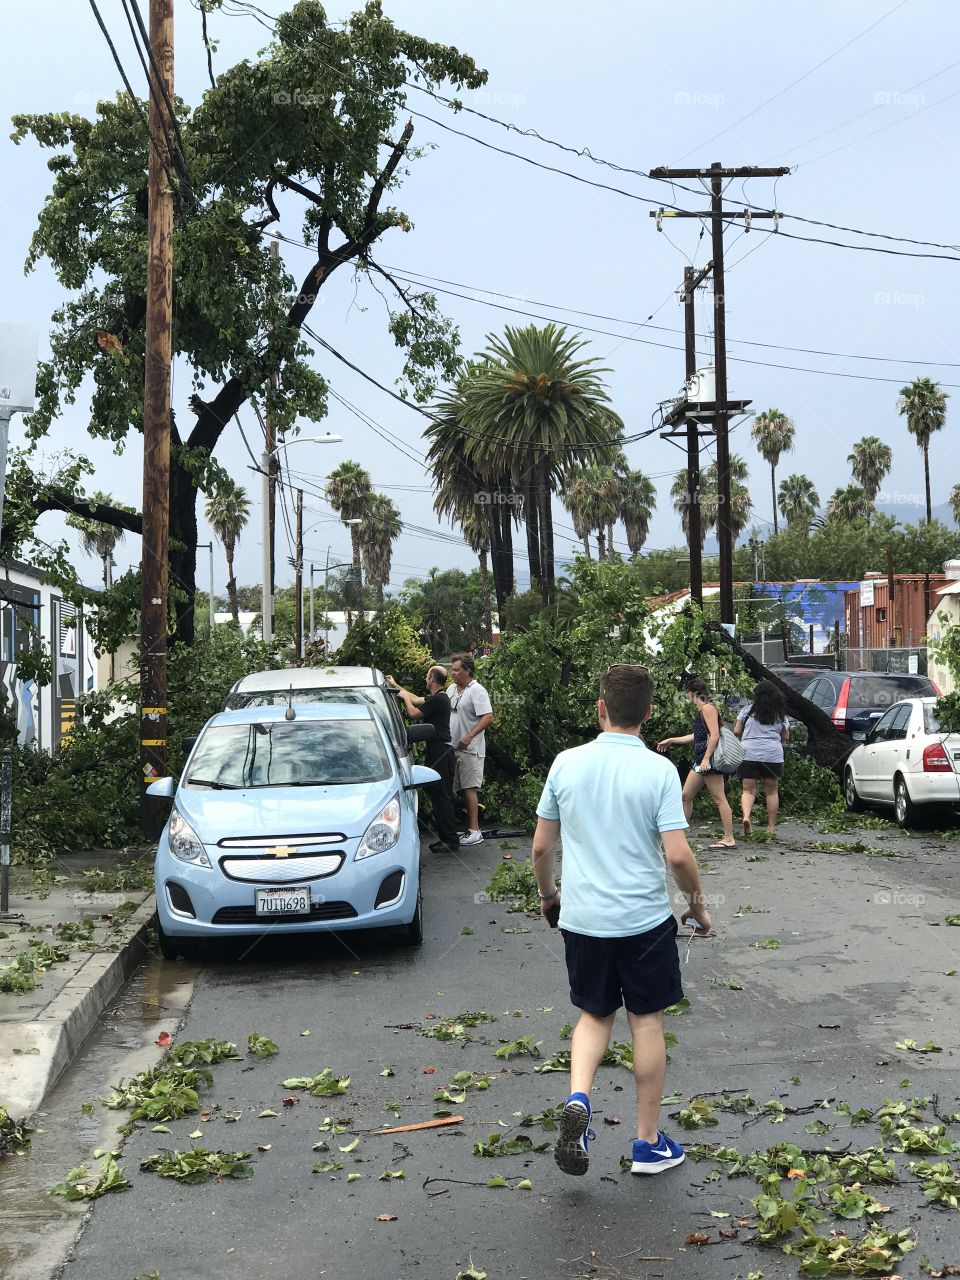 In the aftermath of The Microburst in Santa Barbara, California